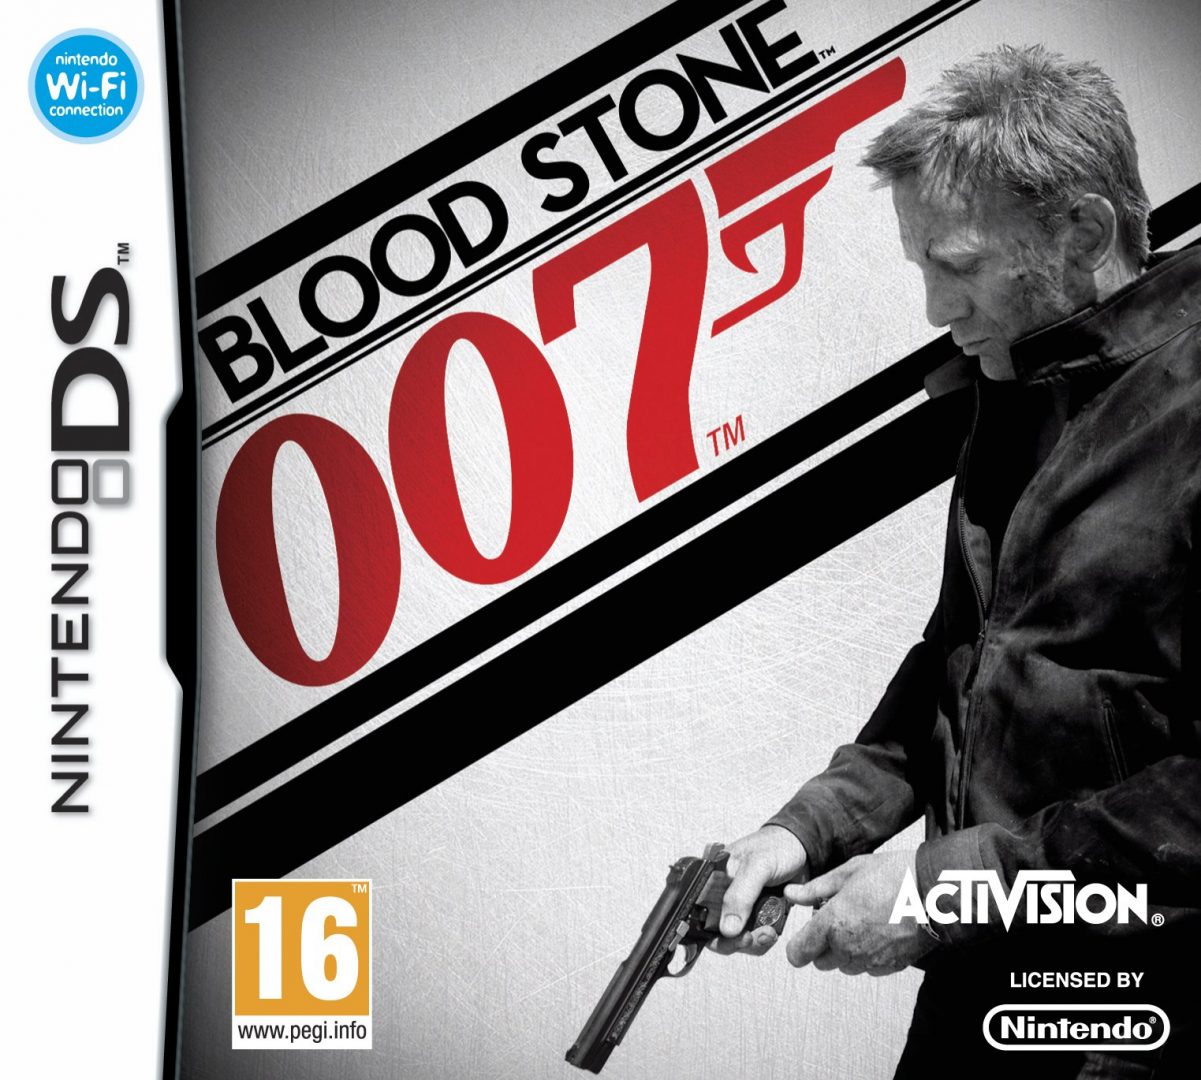 The coverart image of Blood Stone 007 